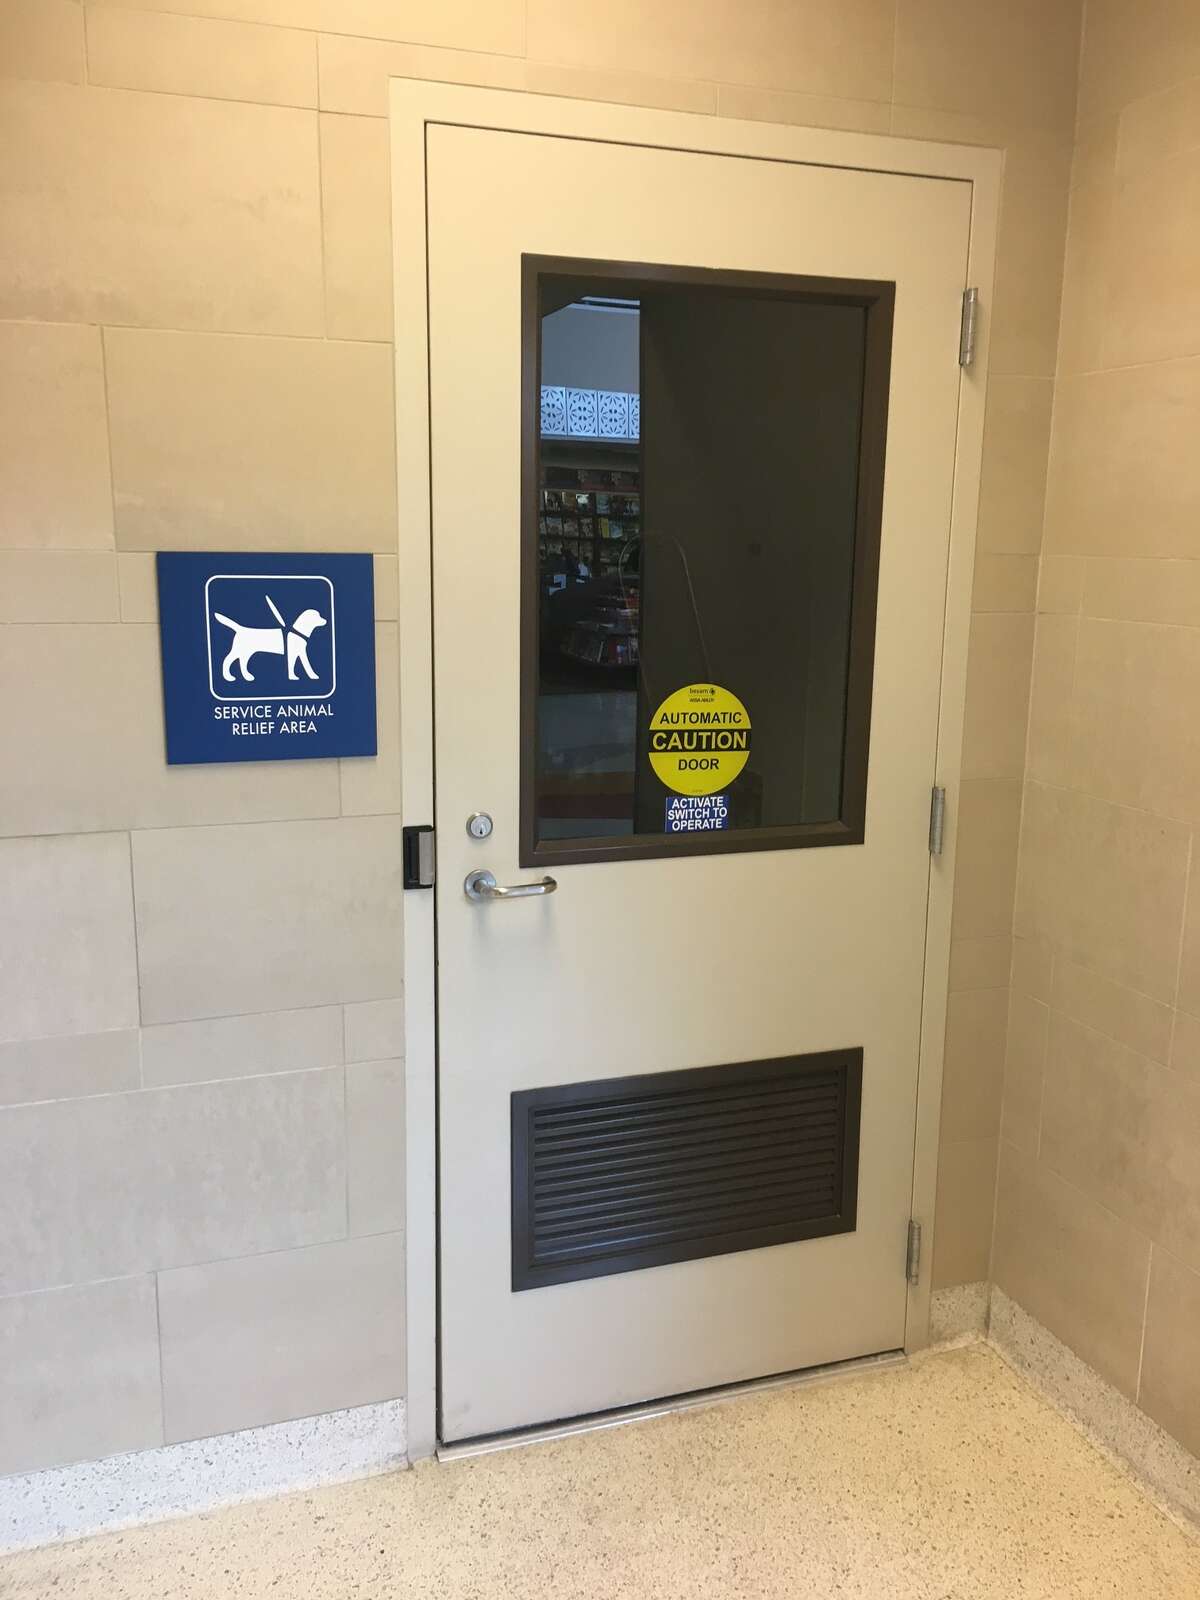 A restroom facility for dogs at the San Antonio International Airport.